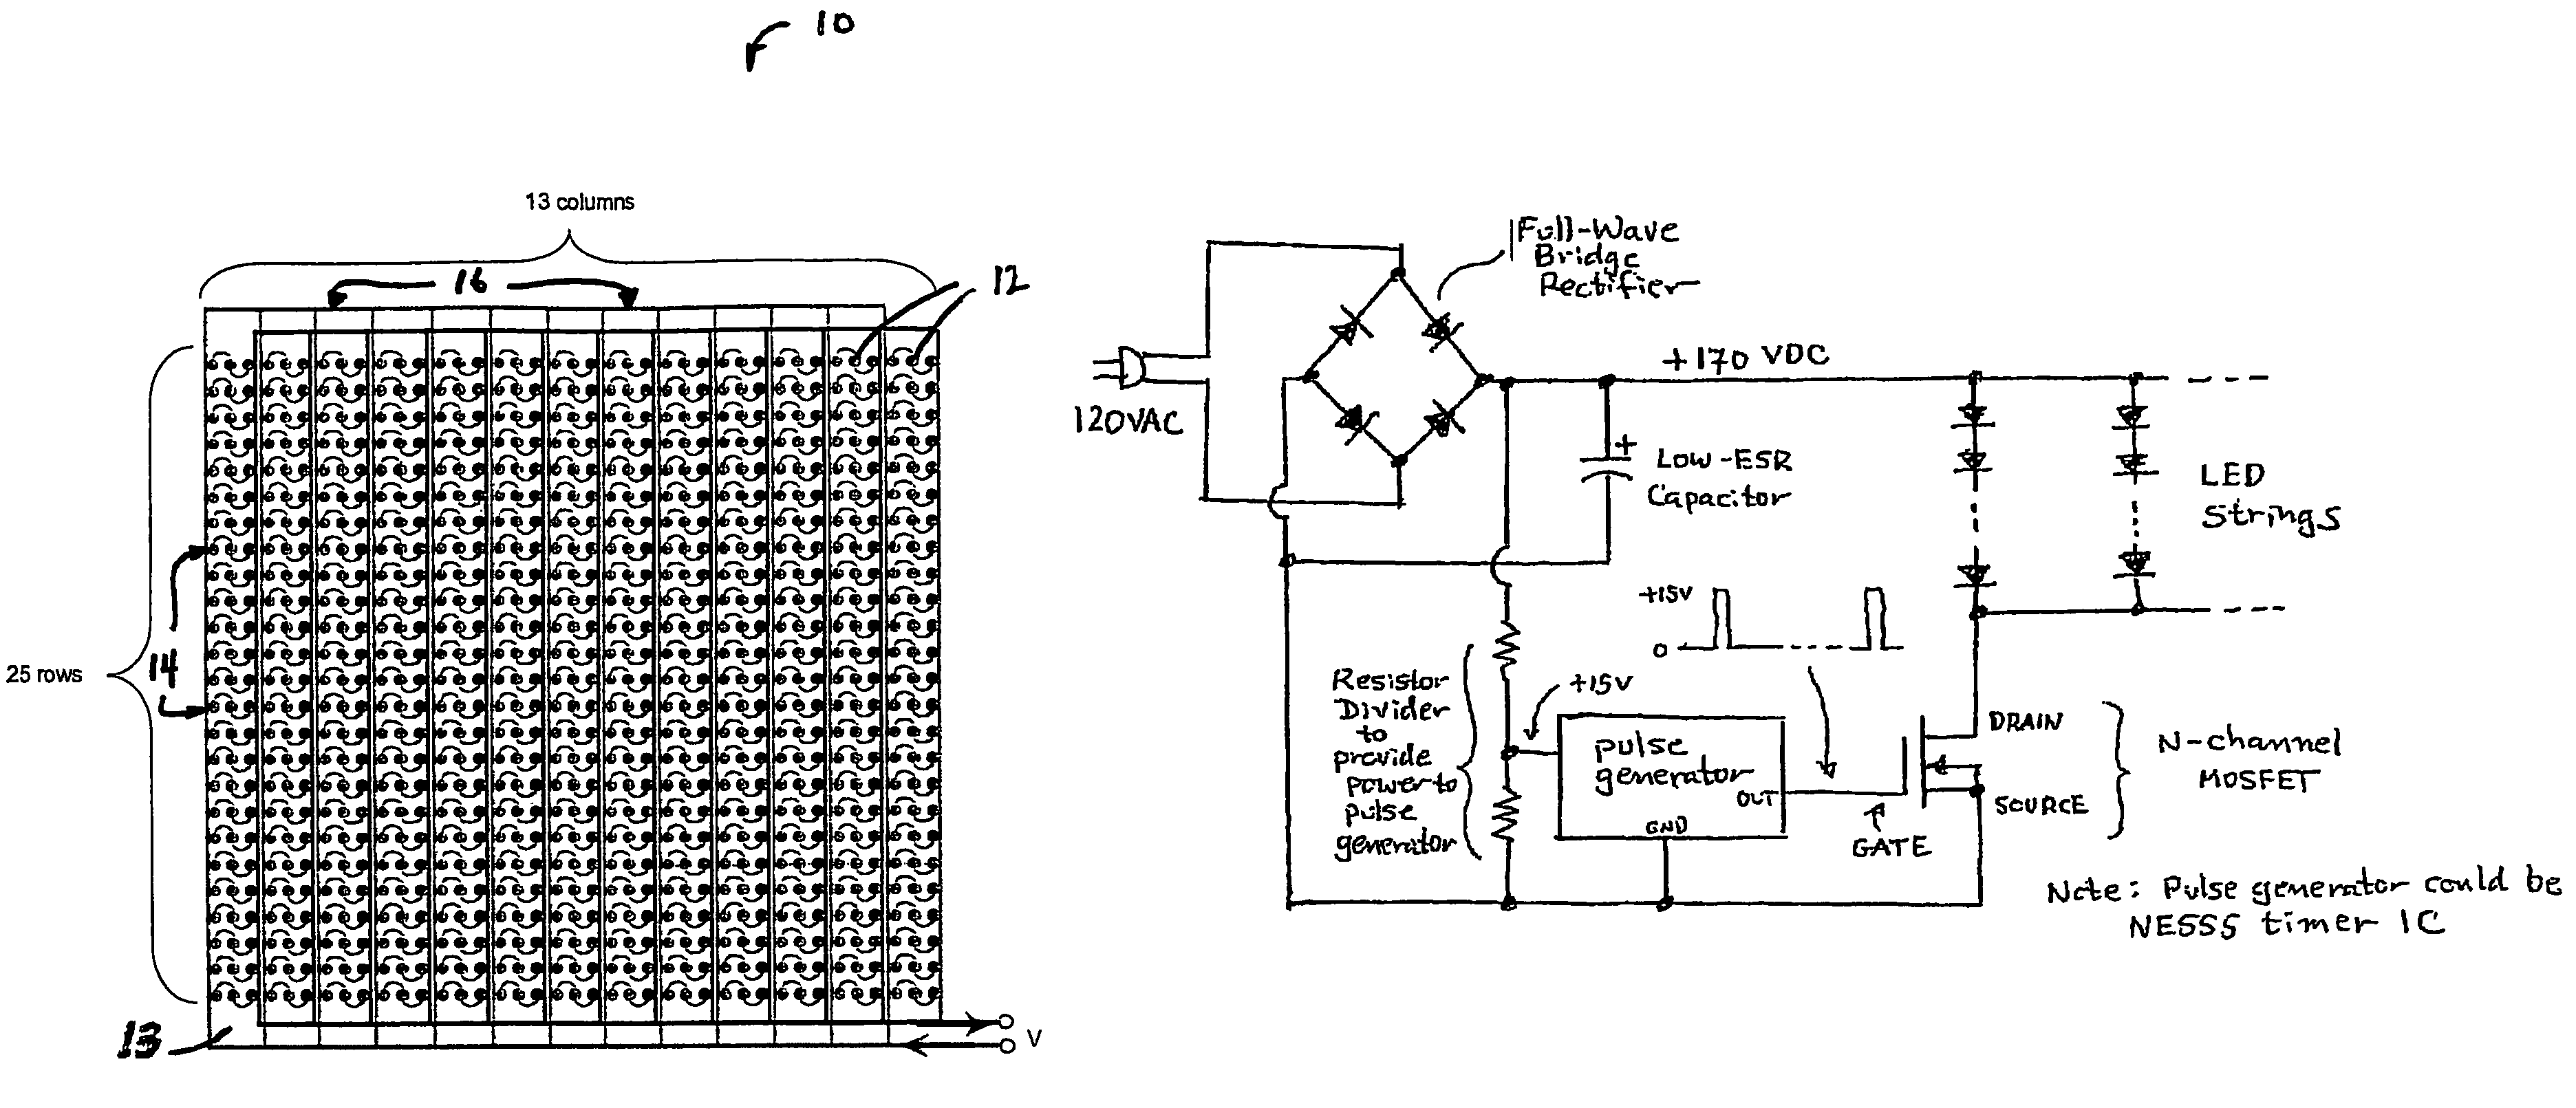 Series wiring of highly reliable light sources